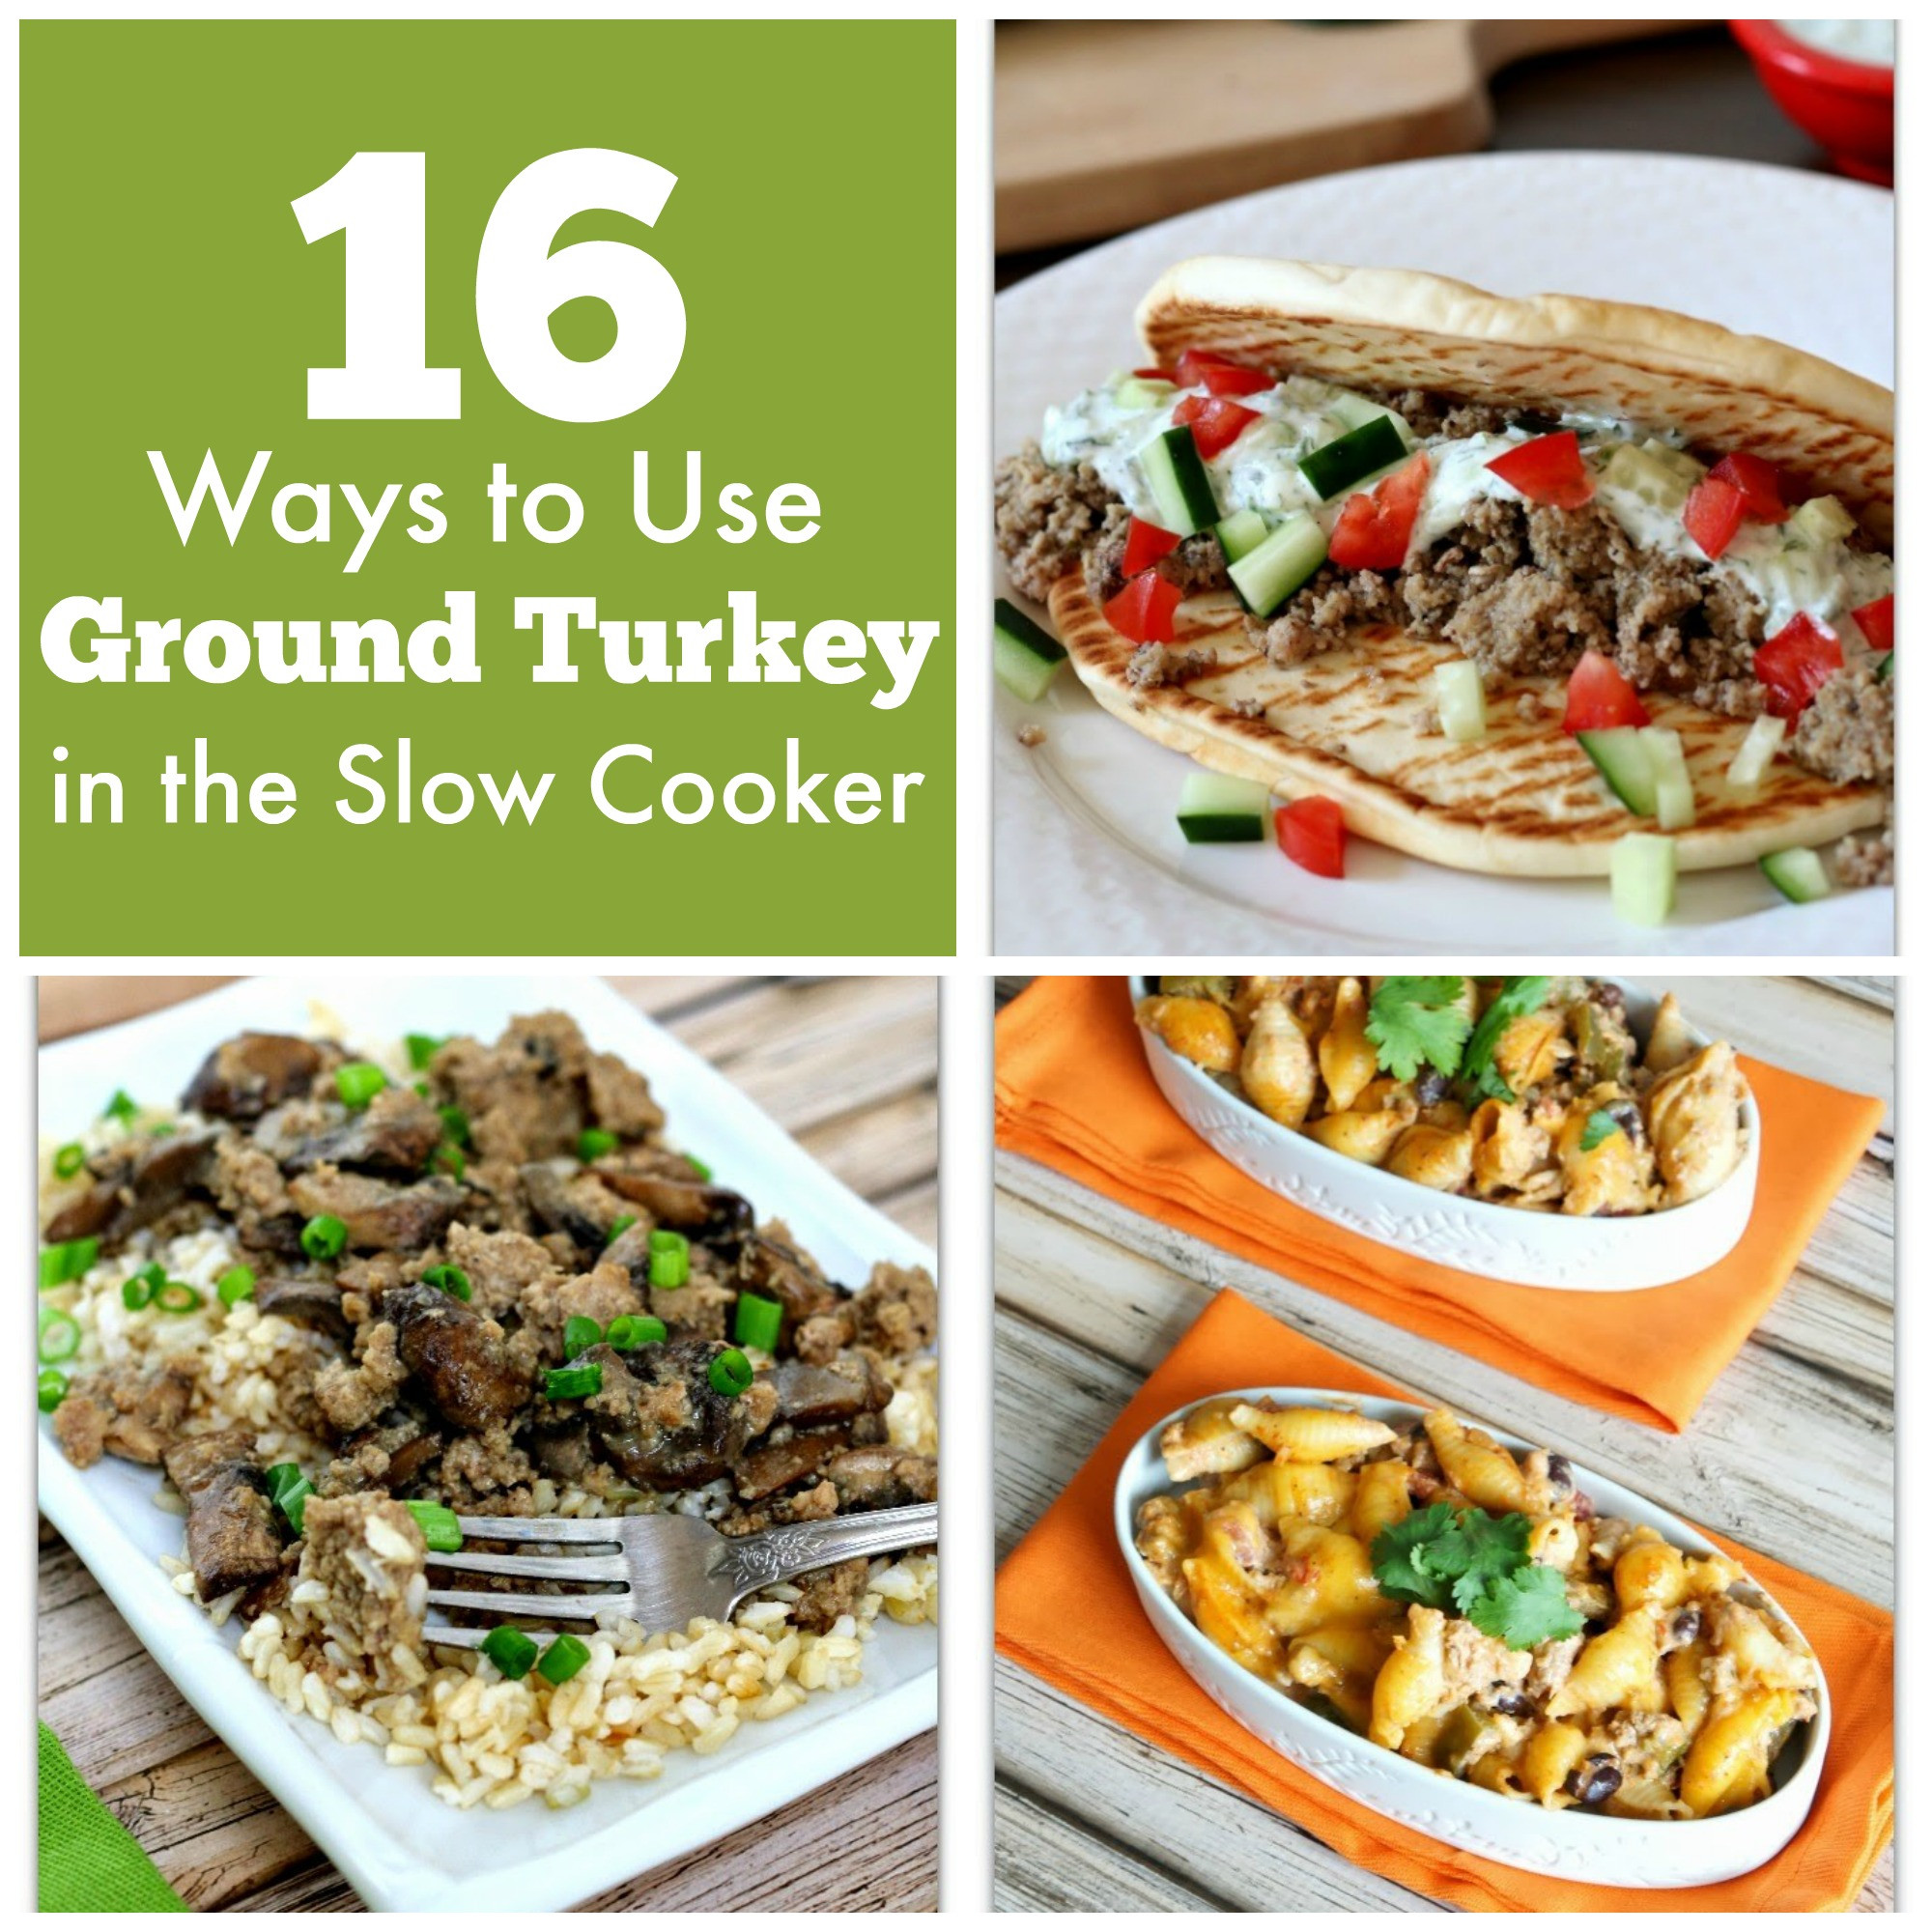 Ground Turkey Slow Cooker
 16 Ways to Use Ground Turkey in the Slow Cooker plus 5